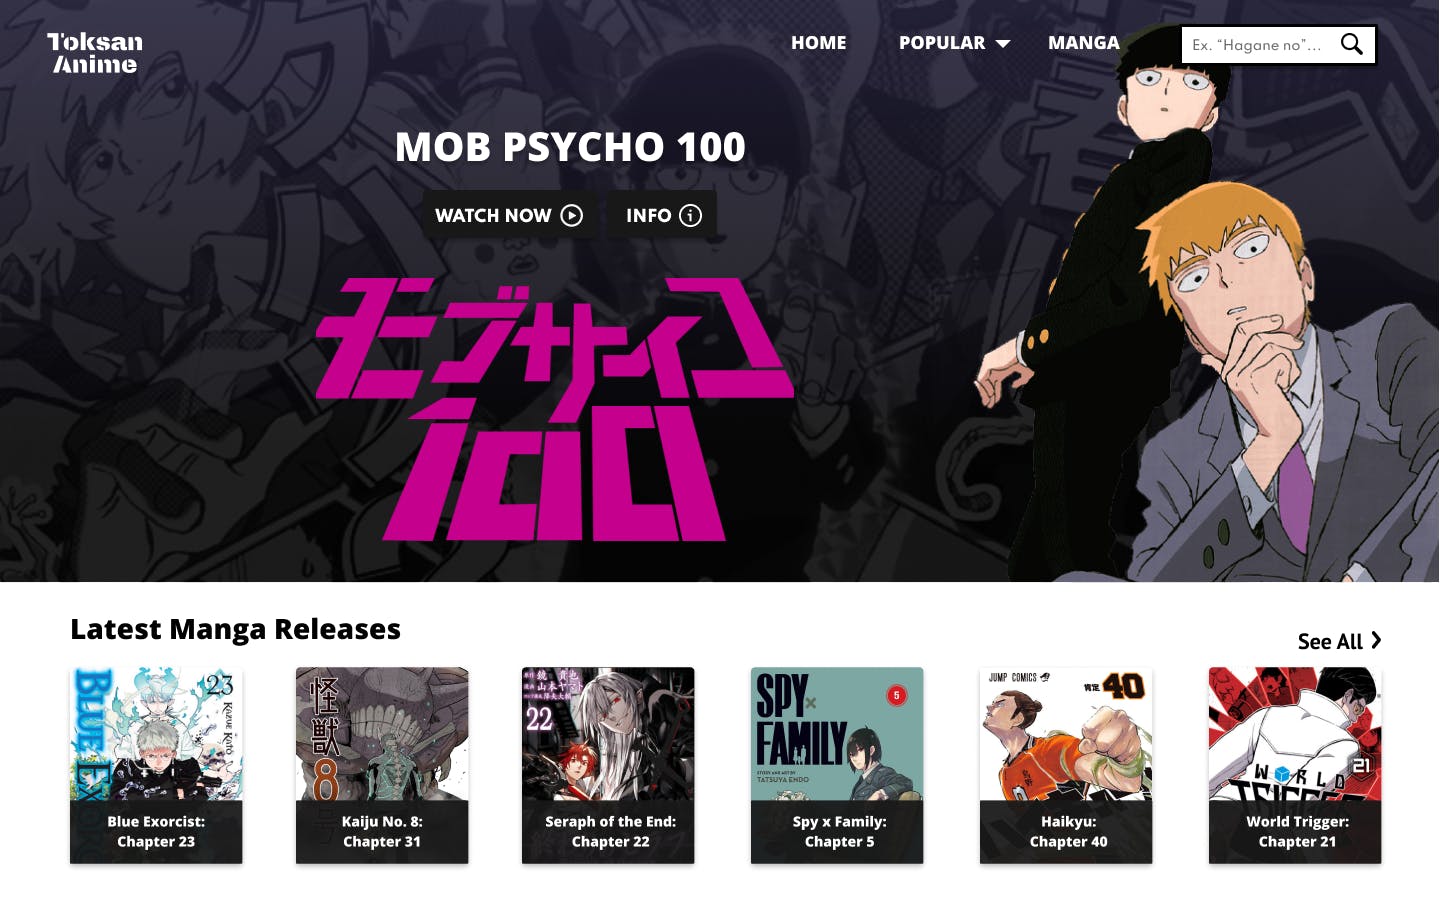 The landing page of Toksan Anime which features an ad for "Mob Psycho 100"